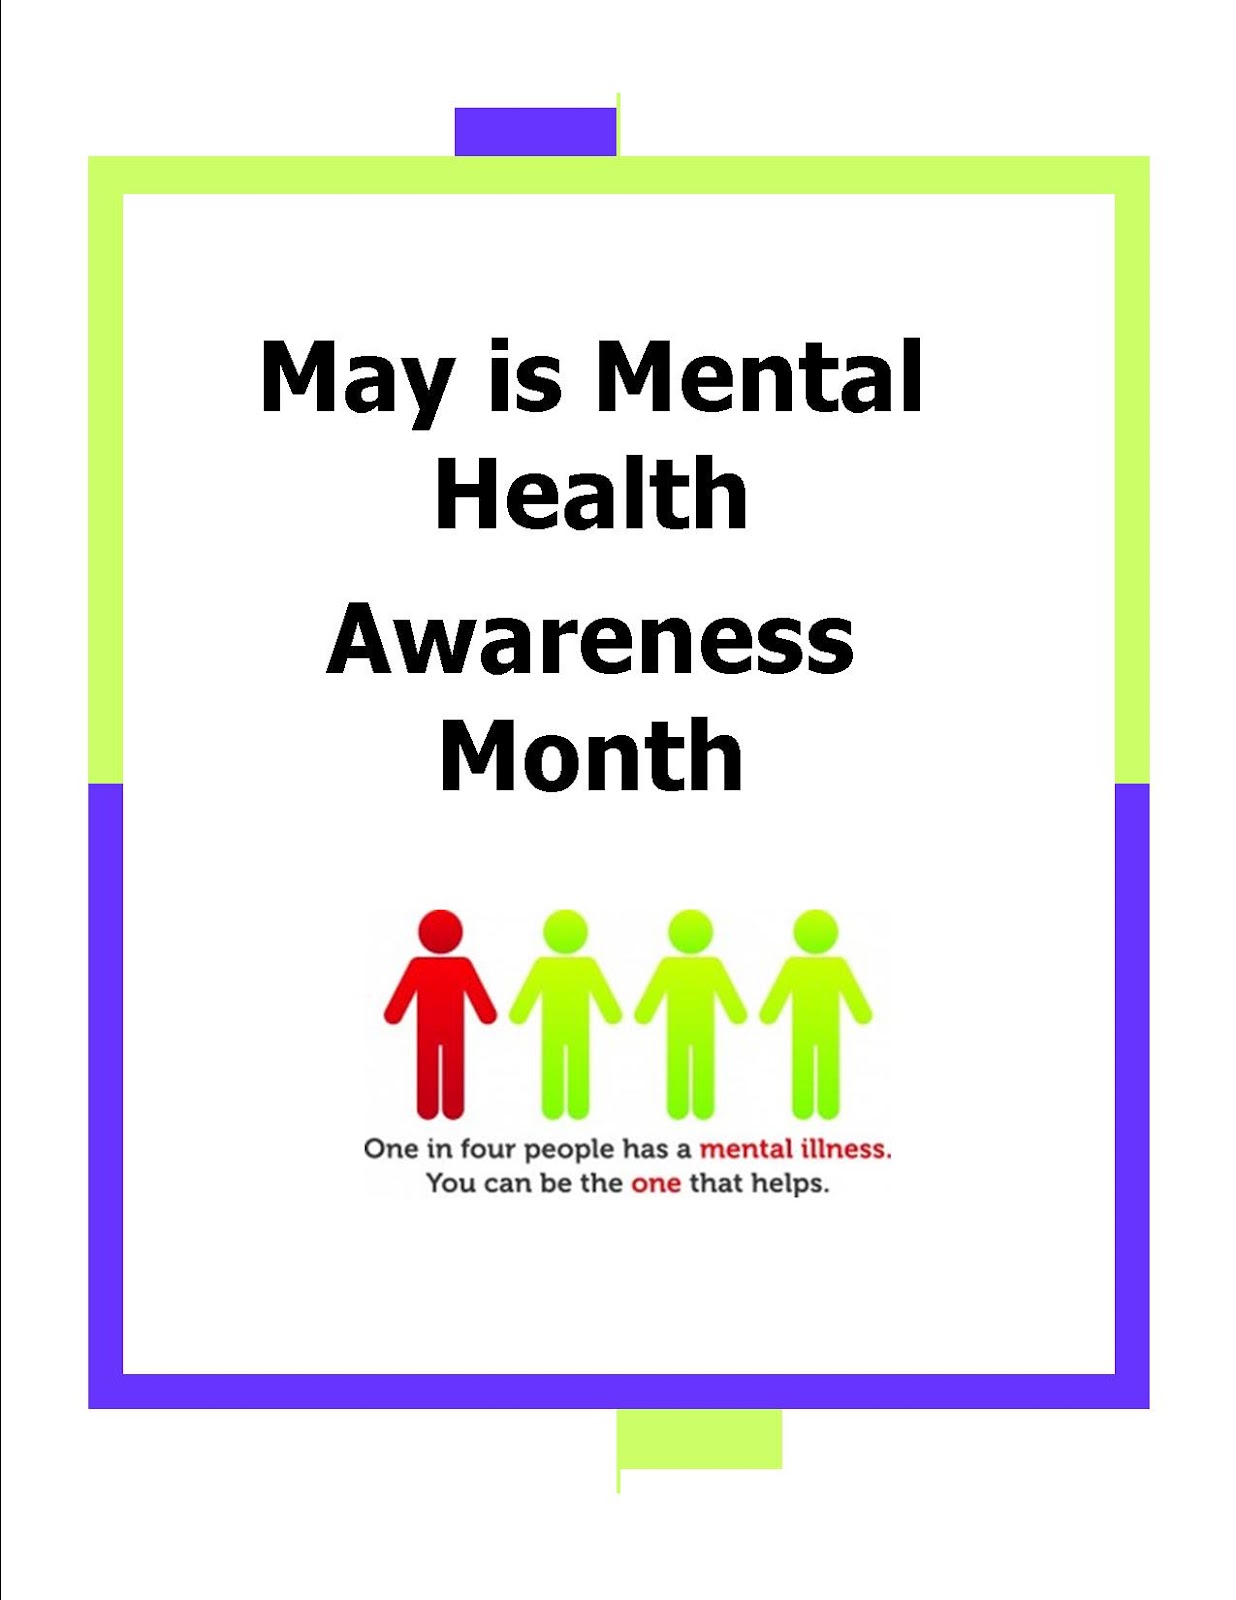 Hamden Library Blog: May is Mental Health Awareness Month